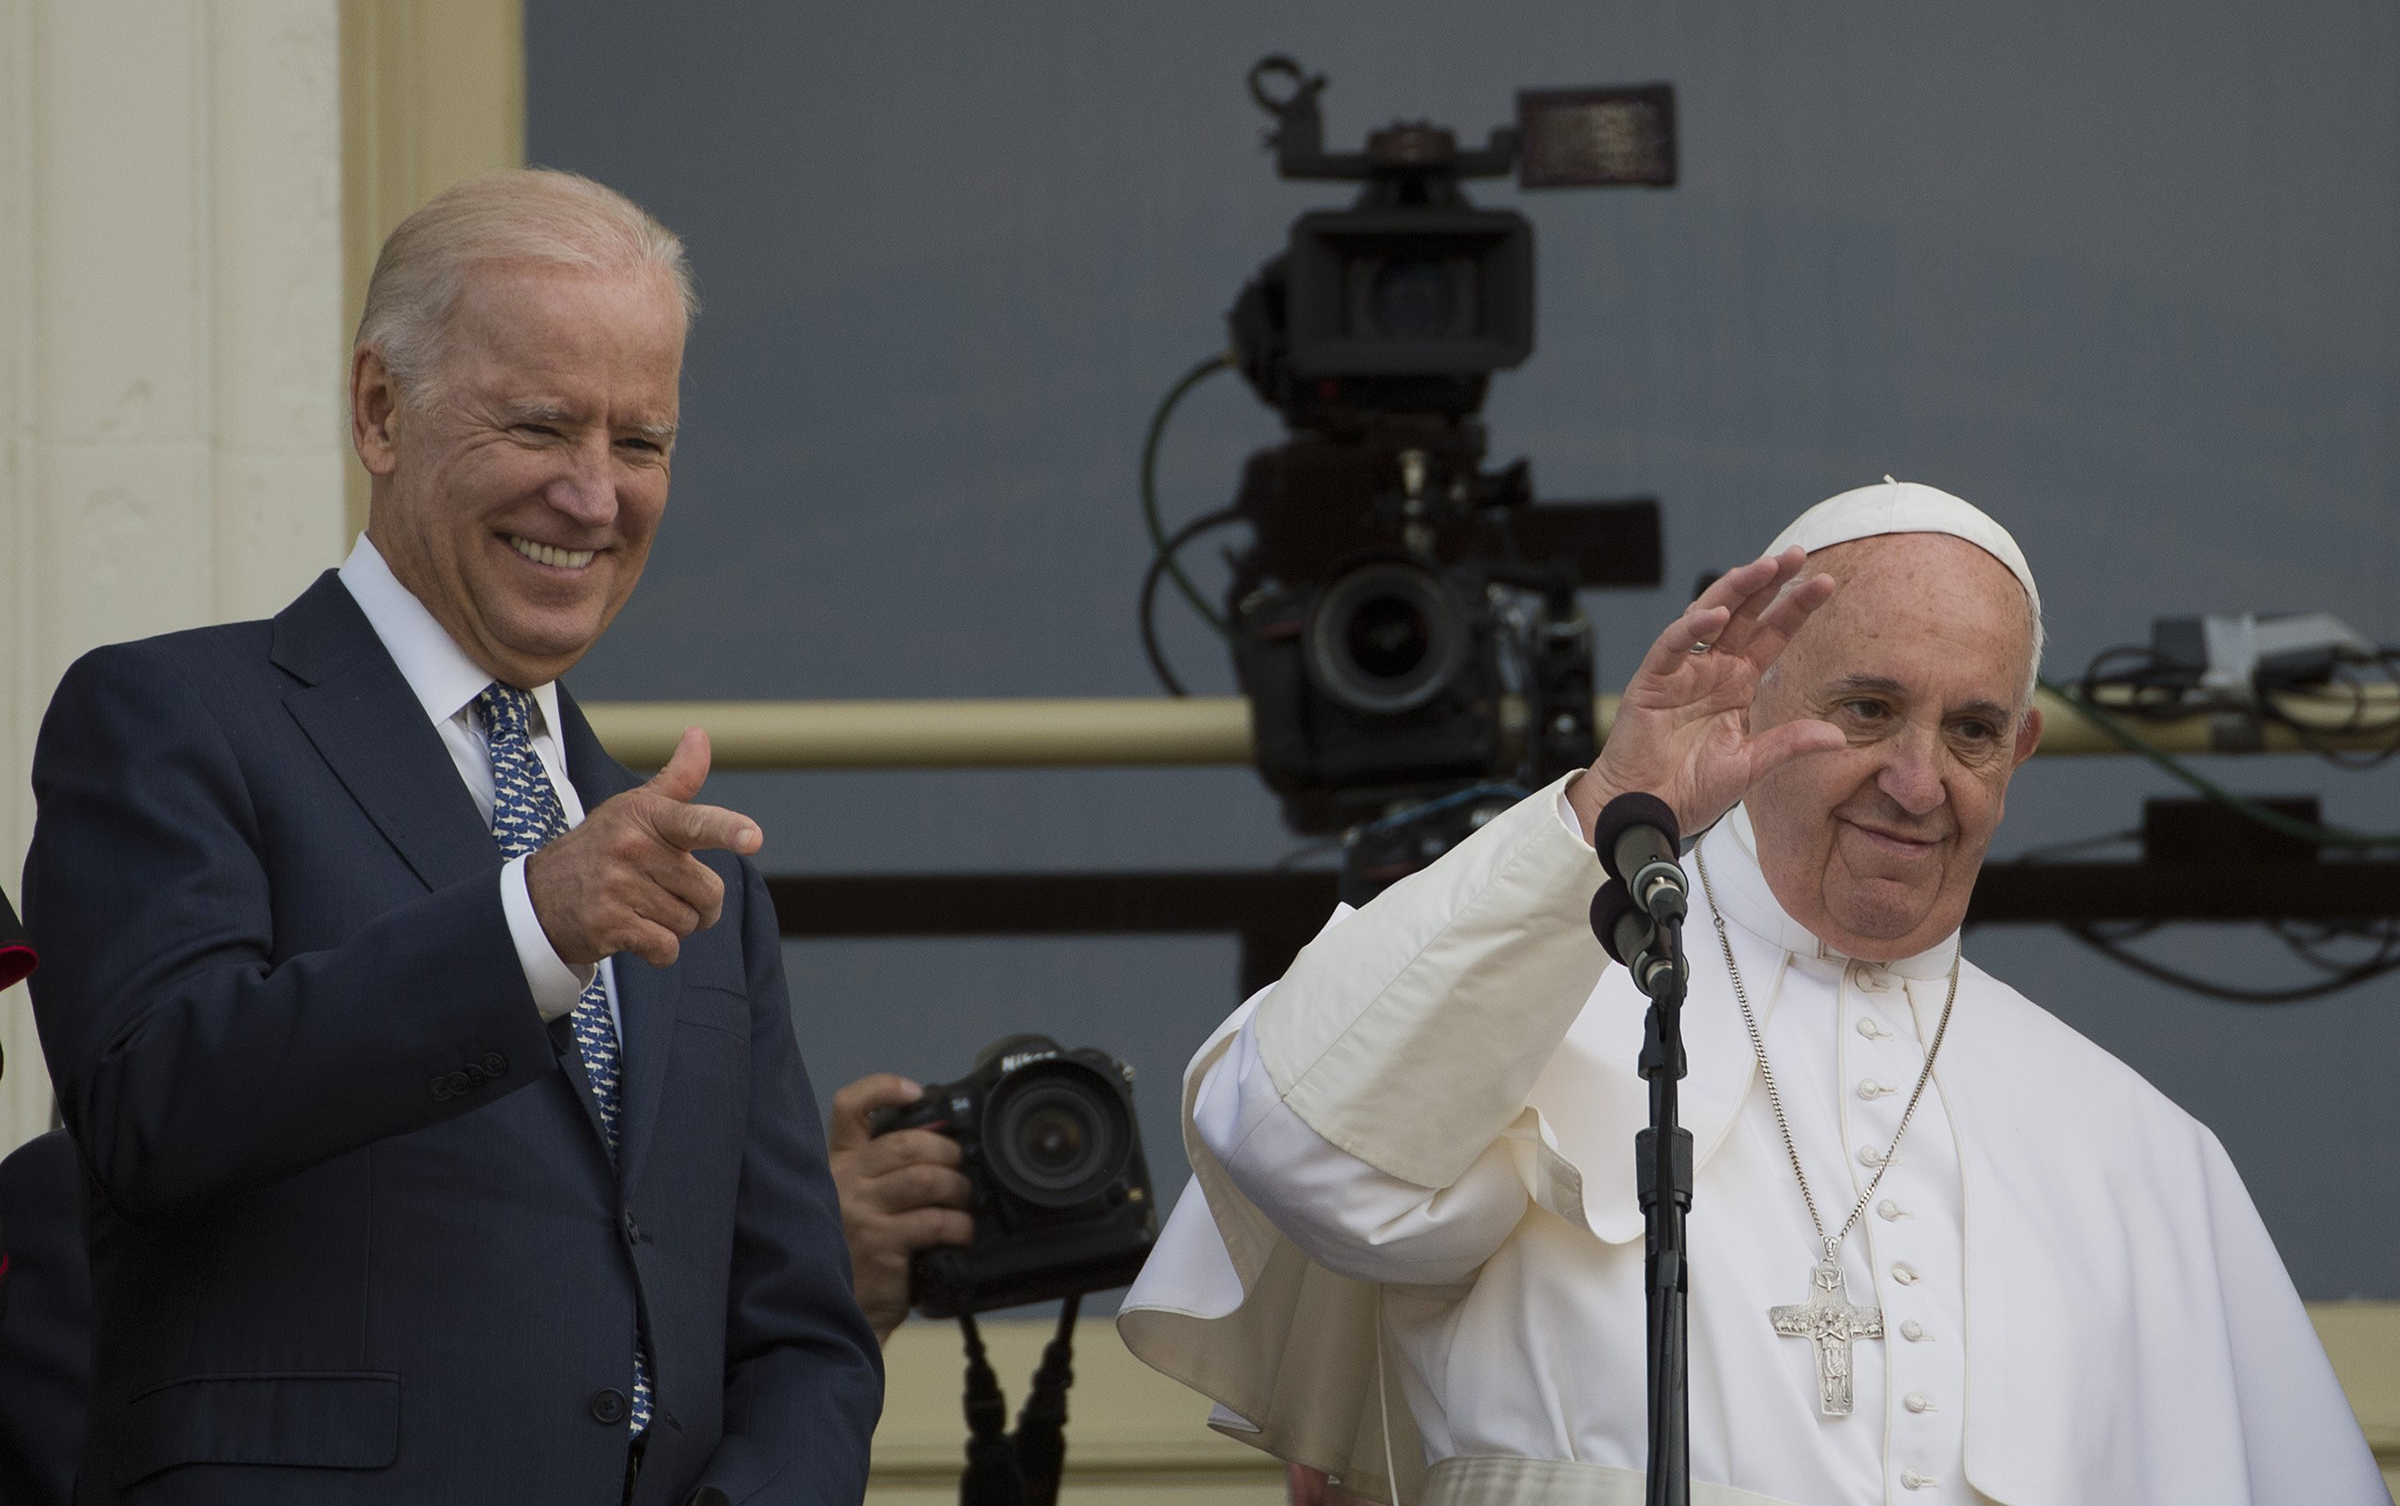 Biden with Pope Francis in Washington on Sept. 24, 2015, after the Pontiff’s address to a joint session of Congress